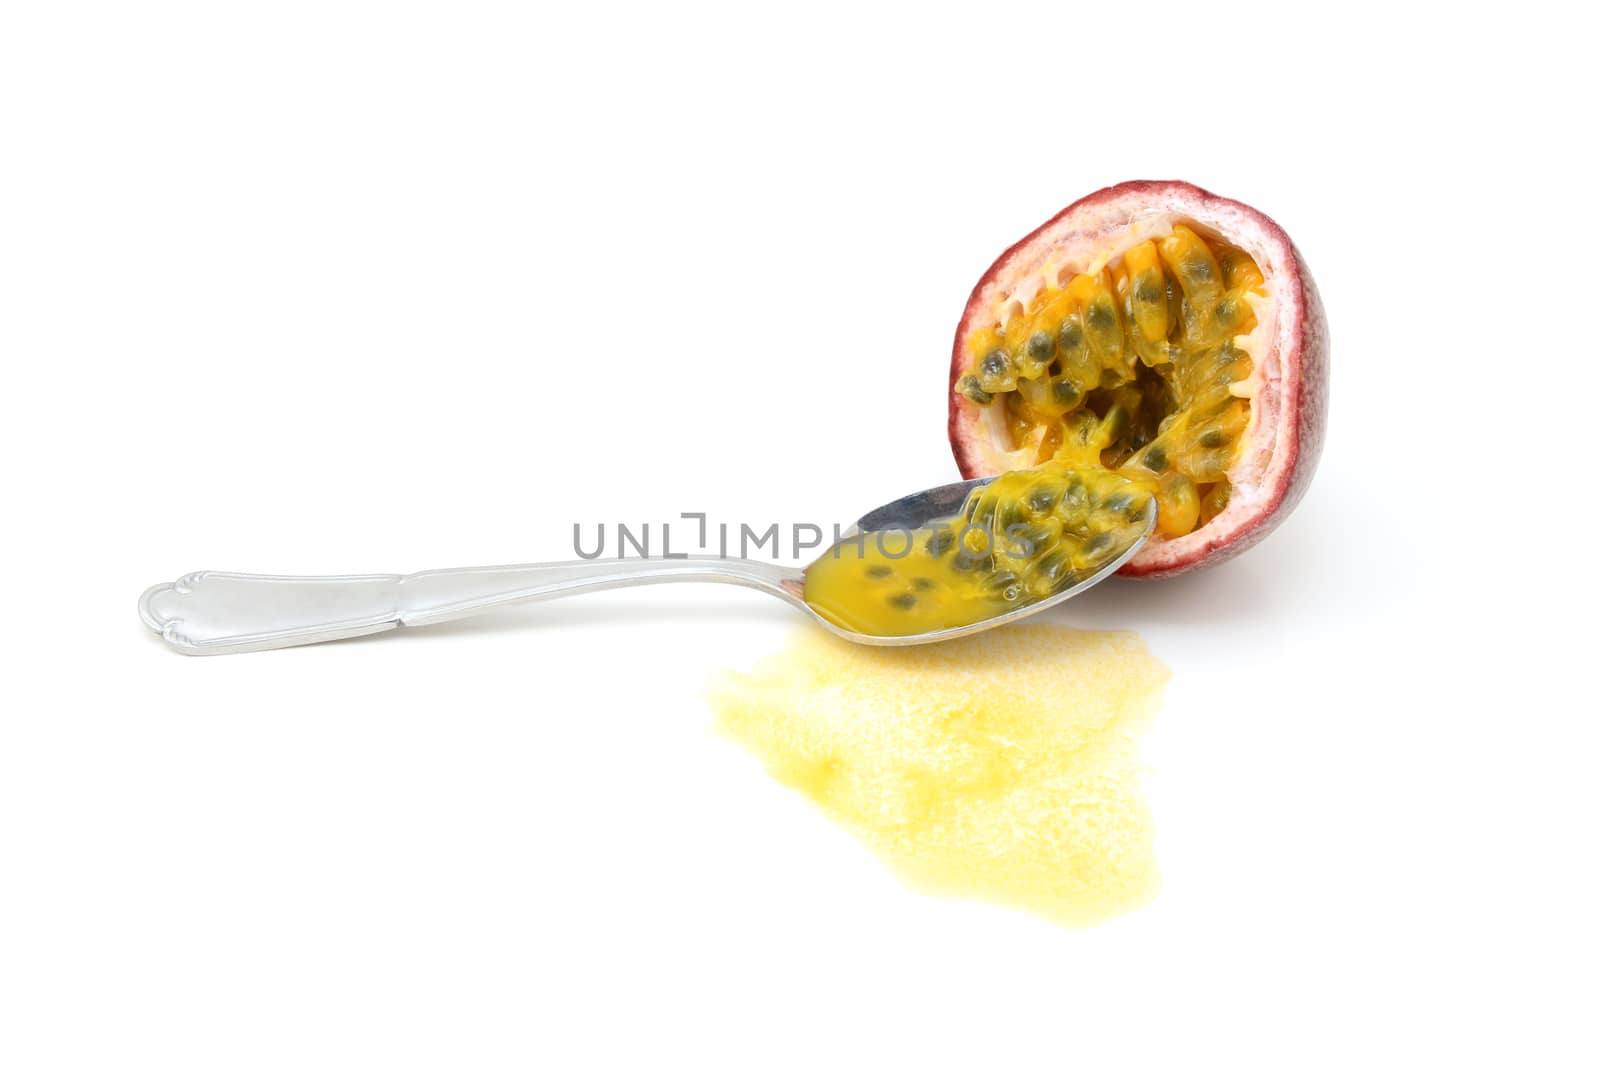 Spoon scooping out seeds from half a purple passion fruit with sweet spilled juice, on a white background